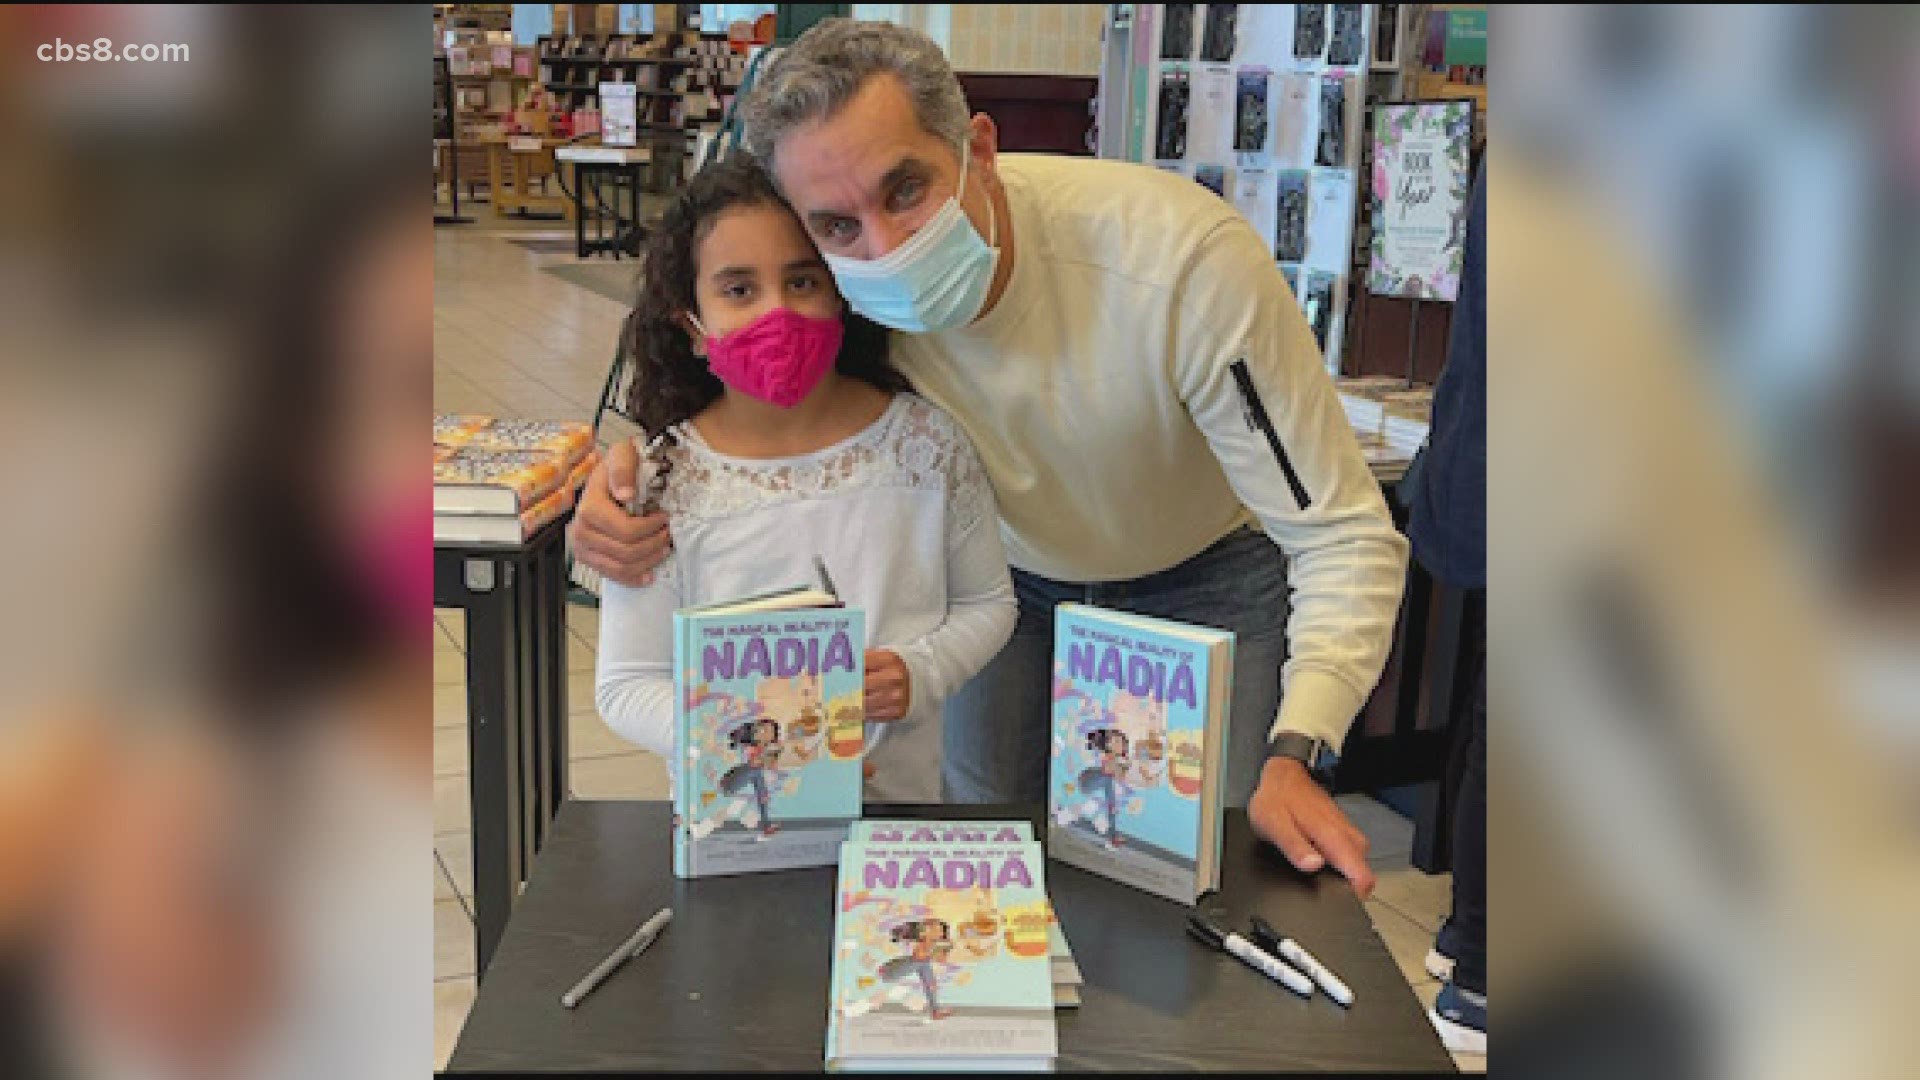 Bassem Youssef joined Morning Extra Monday to talk about the inspiration behind “The Magical Reality of Nadia.”